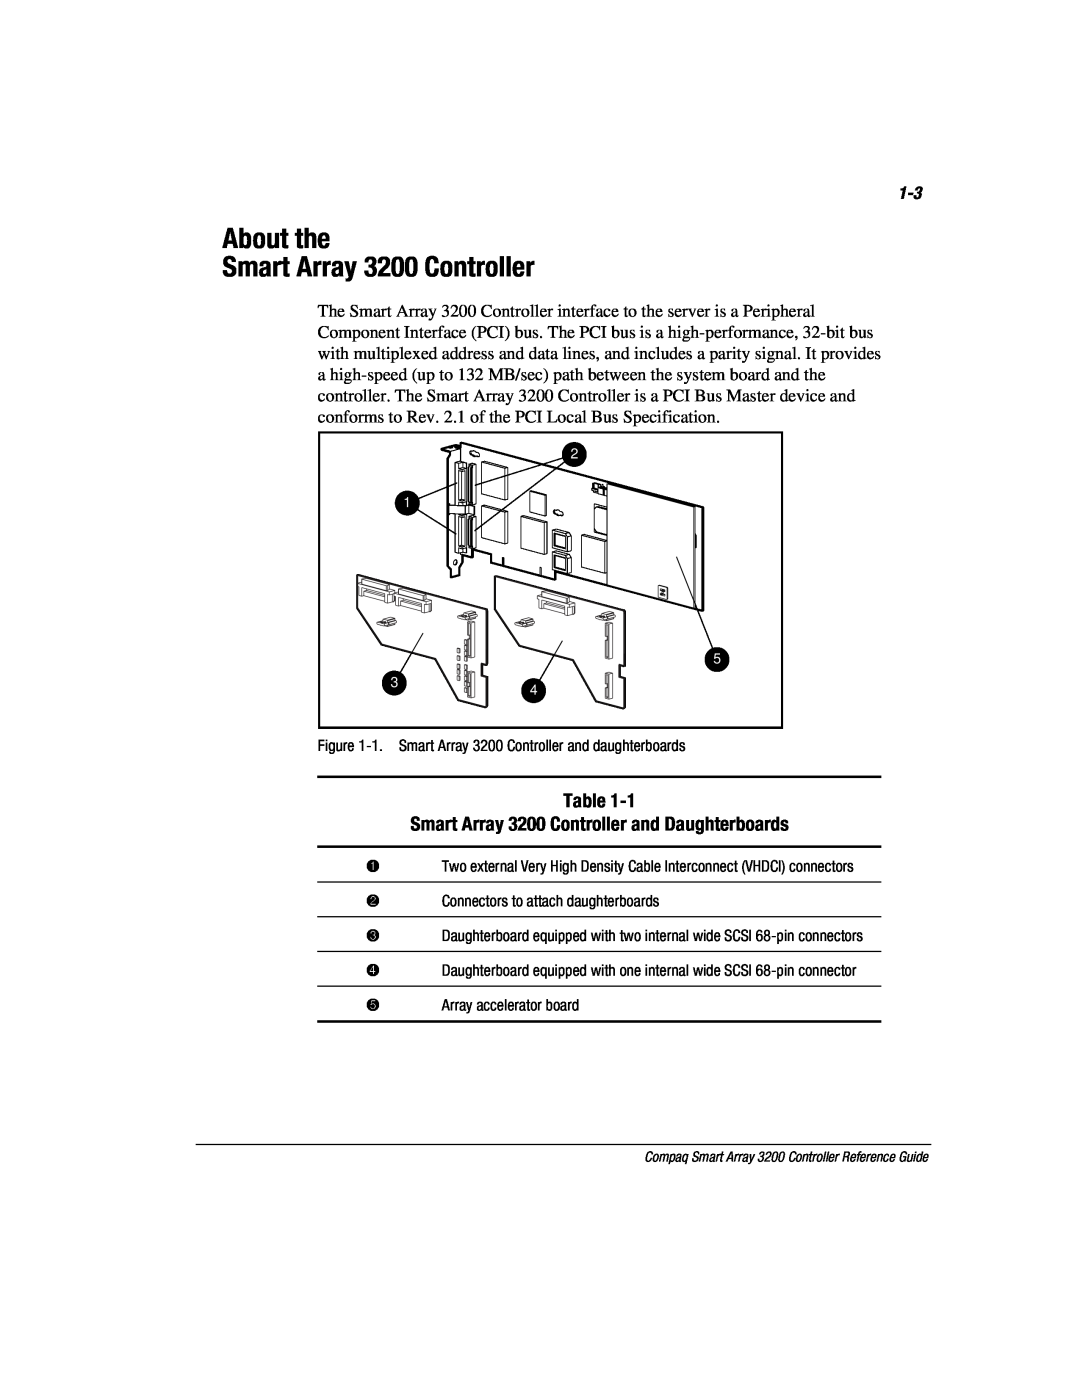 Compaq manual About the Smart Array 3200 Controller, Smart Array 3200 Controller and Daughterboards 